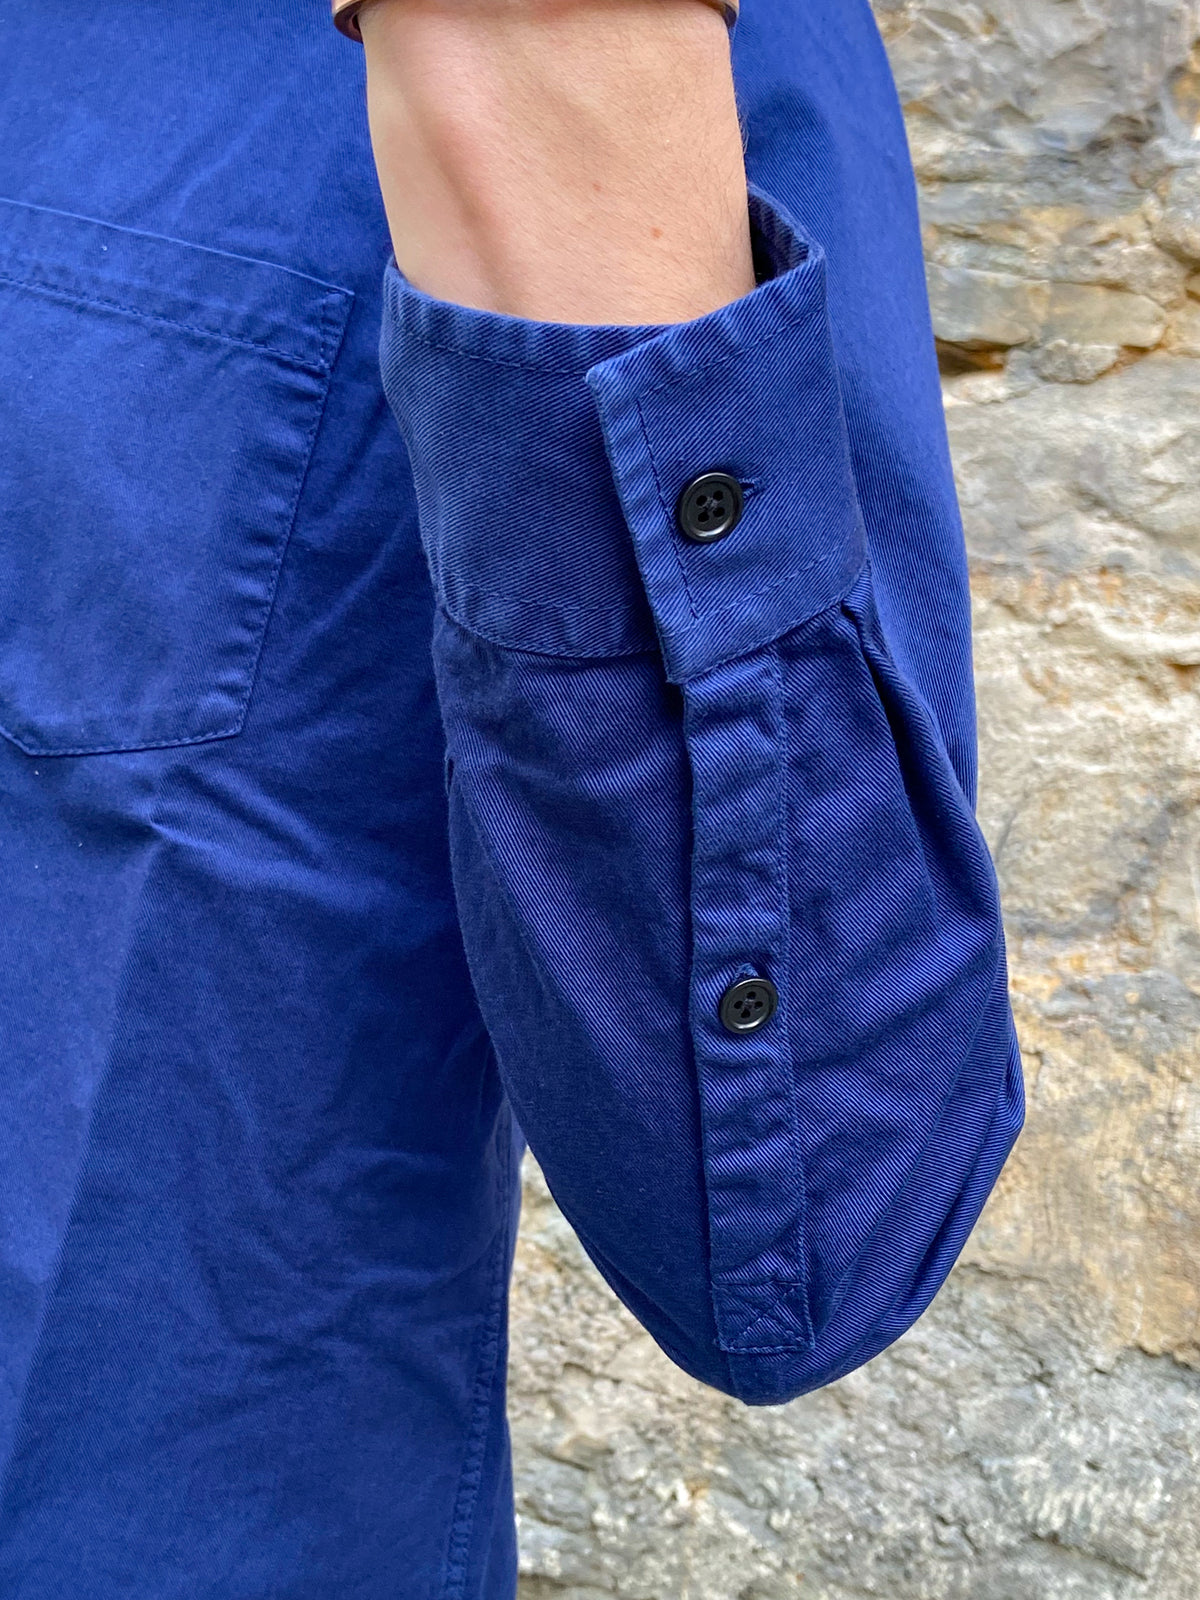 Nudie Jeans Chet Pigment Dye Blueberry